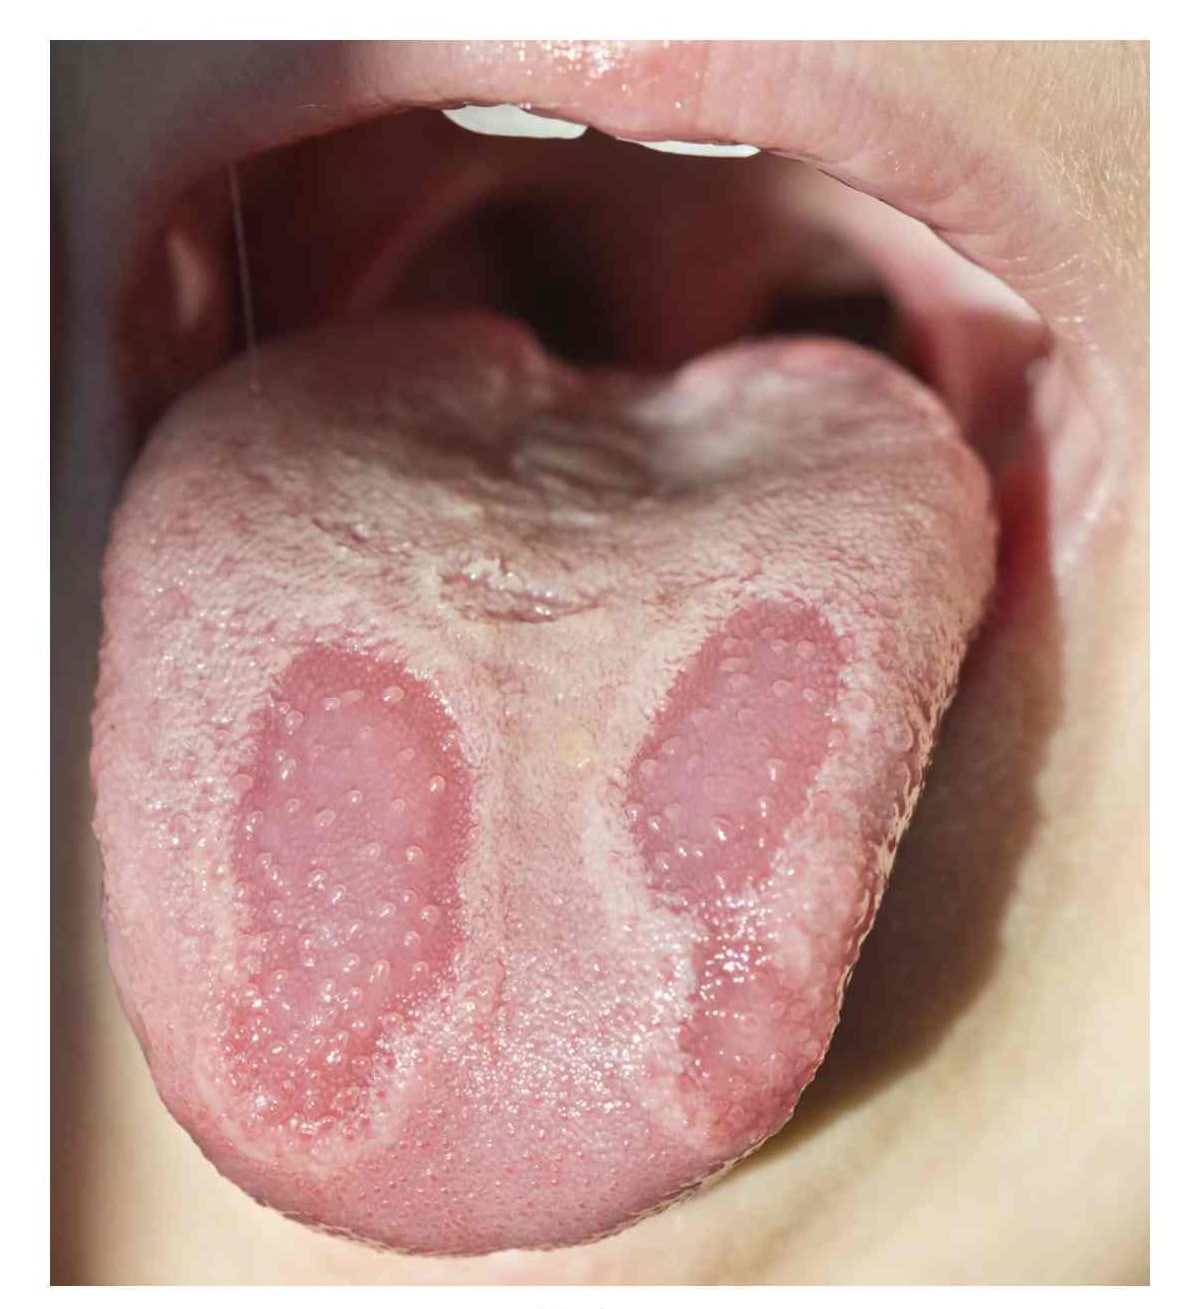 Mystery geographic tongue condition explained by physics